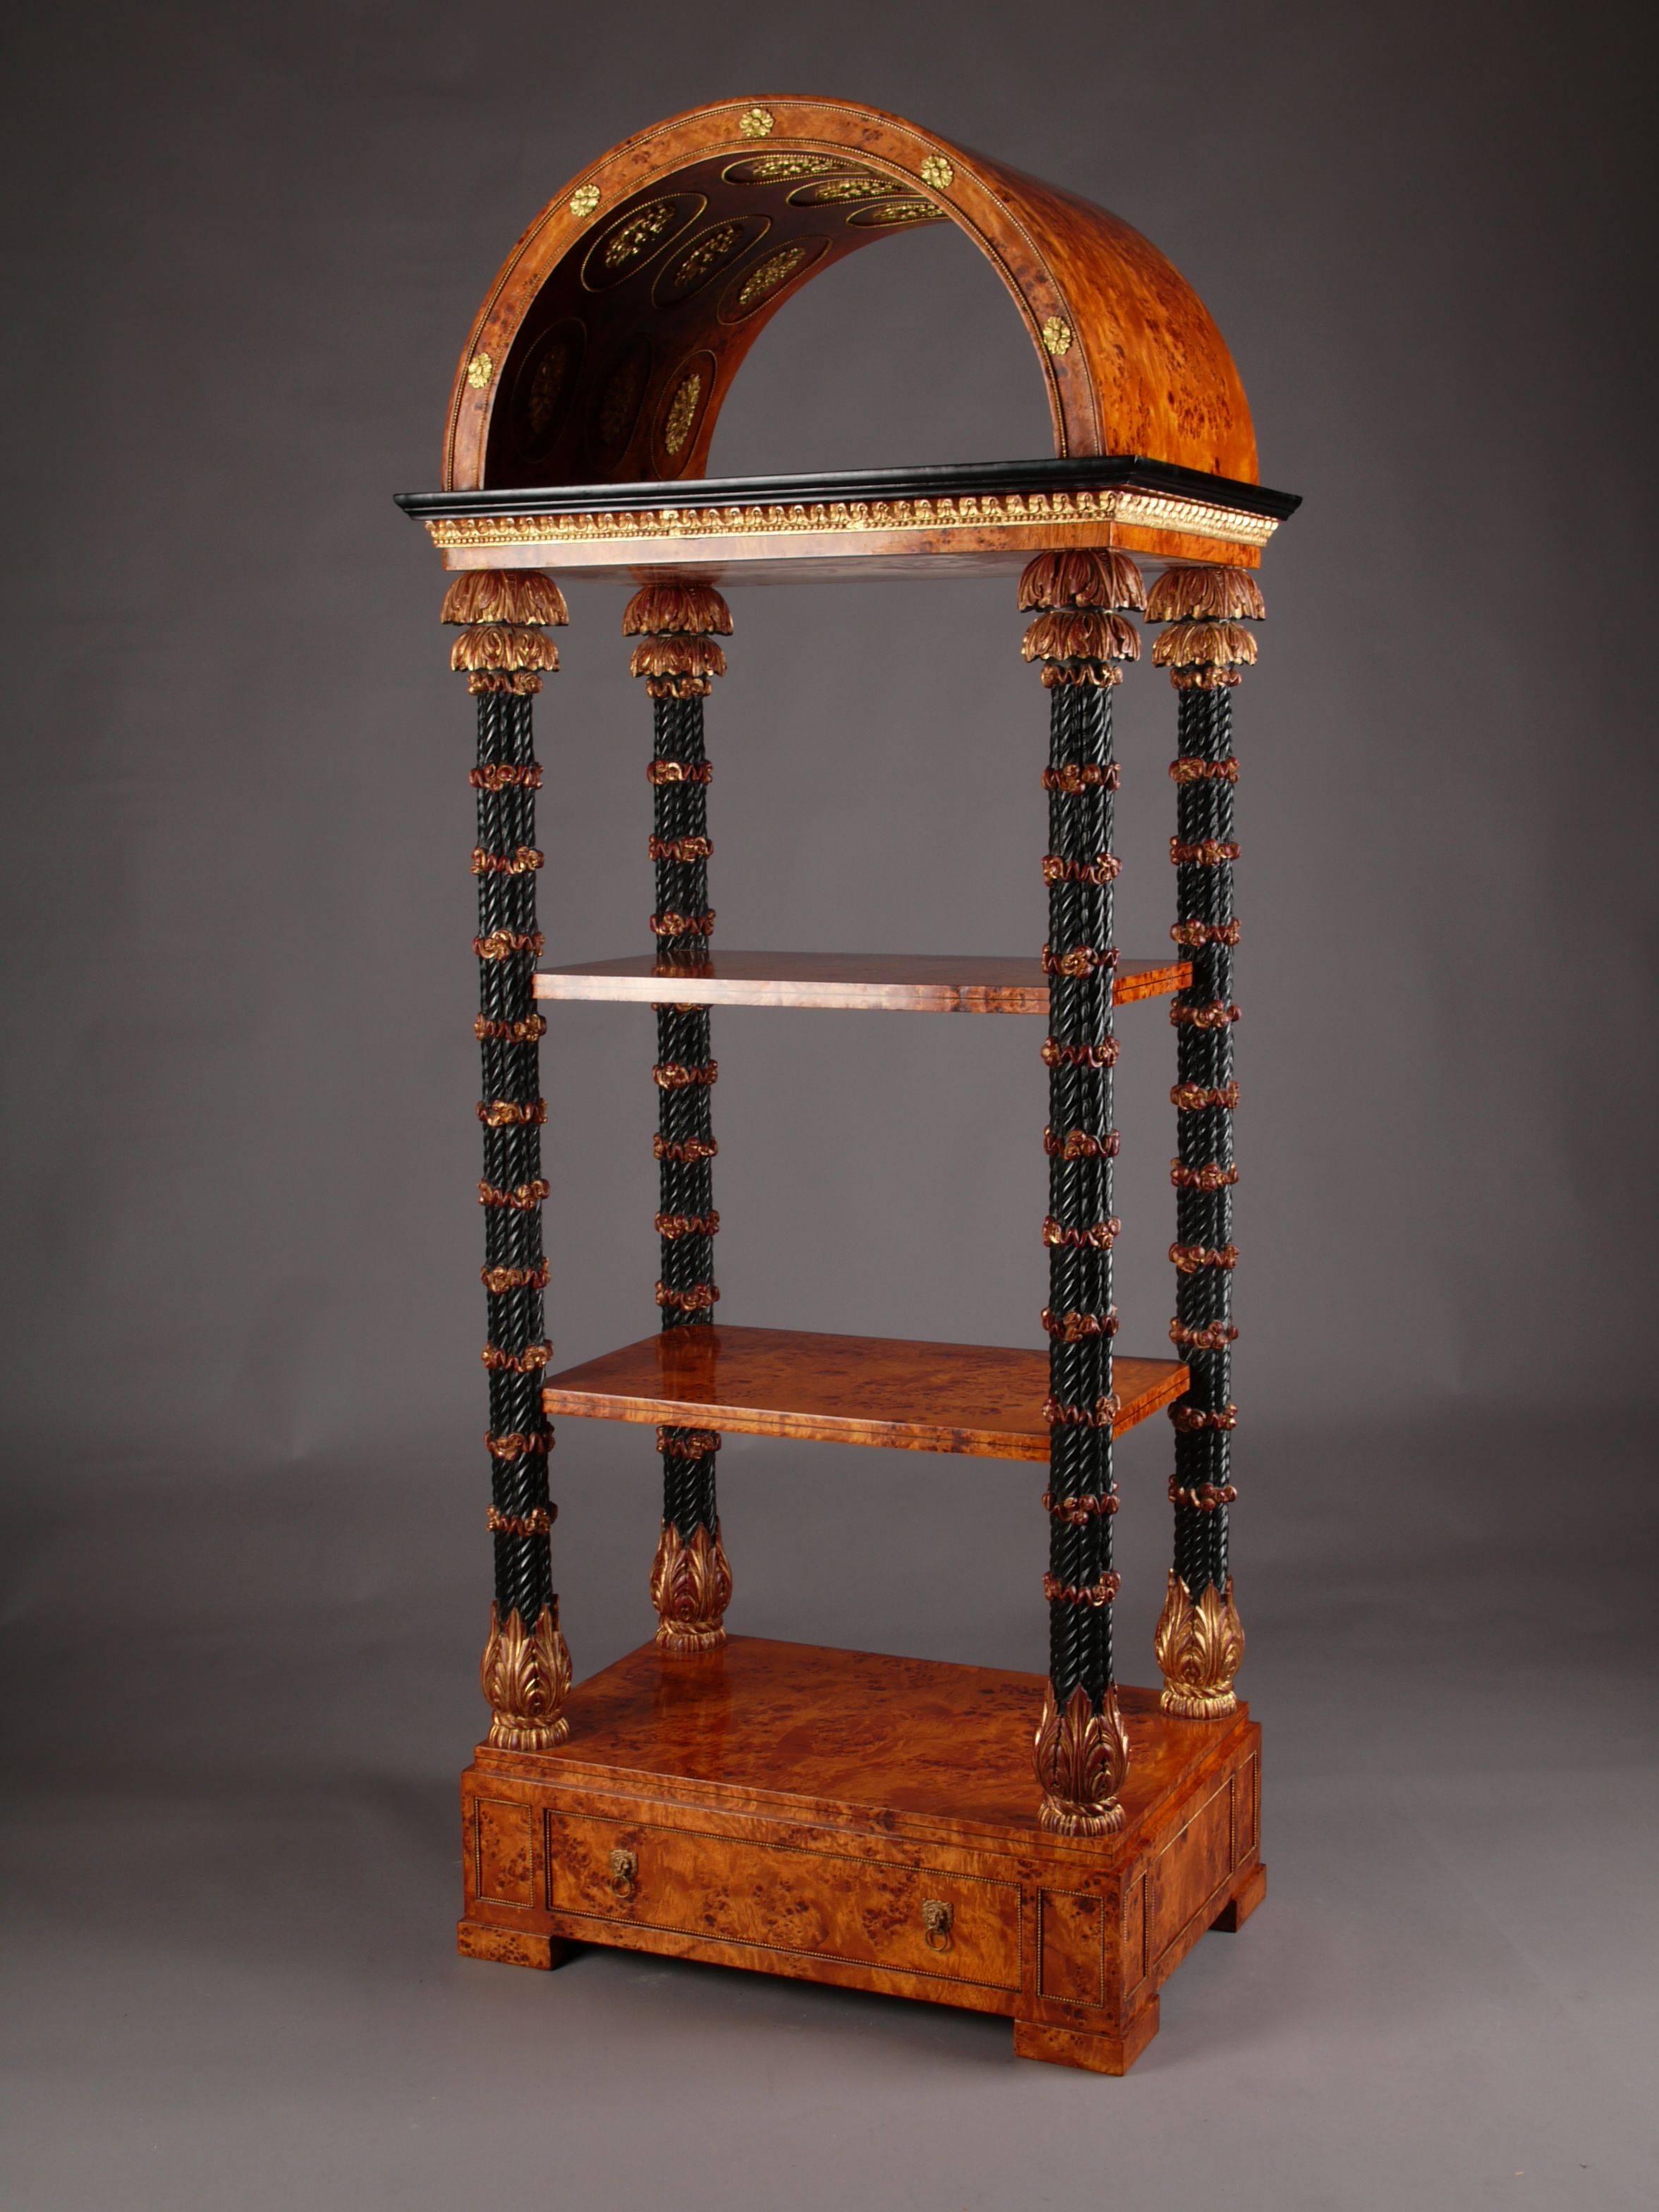 Aristocratic étagère in Royal-Donau style.
Maple root and solid fully moulded carved beechwood. Partially gilded. Highly, right-angled body, architecturally structured body with two shelf boards and edging gallery in the form of a balustrade ending